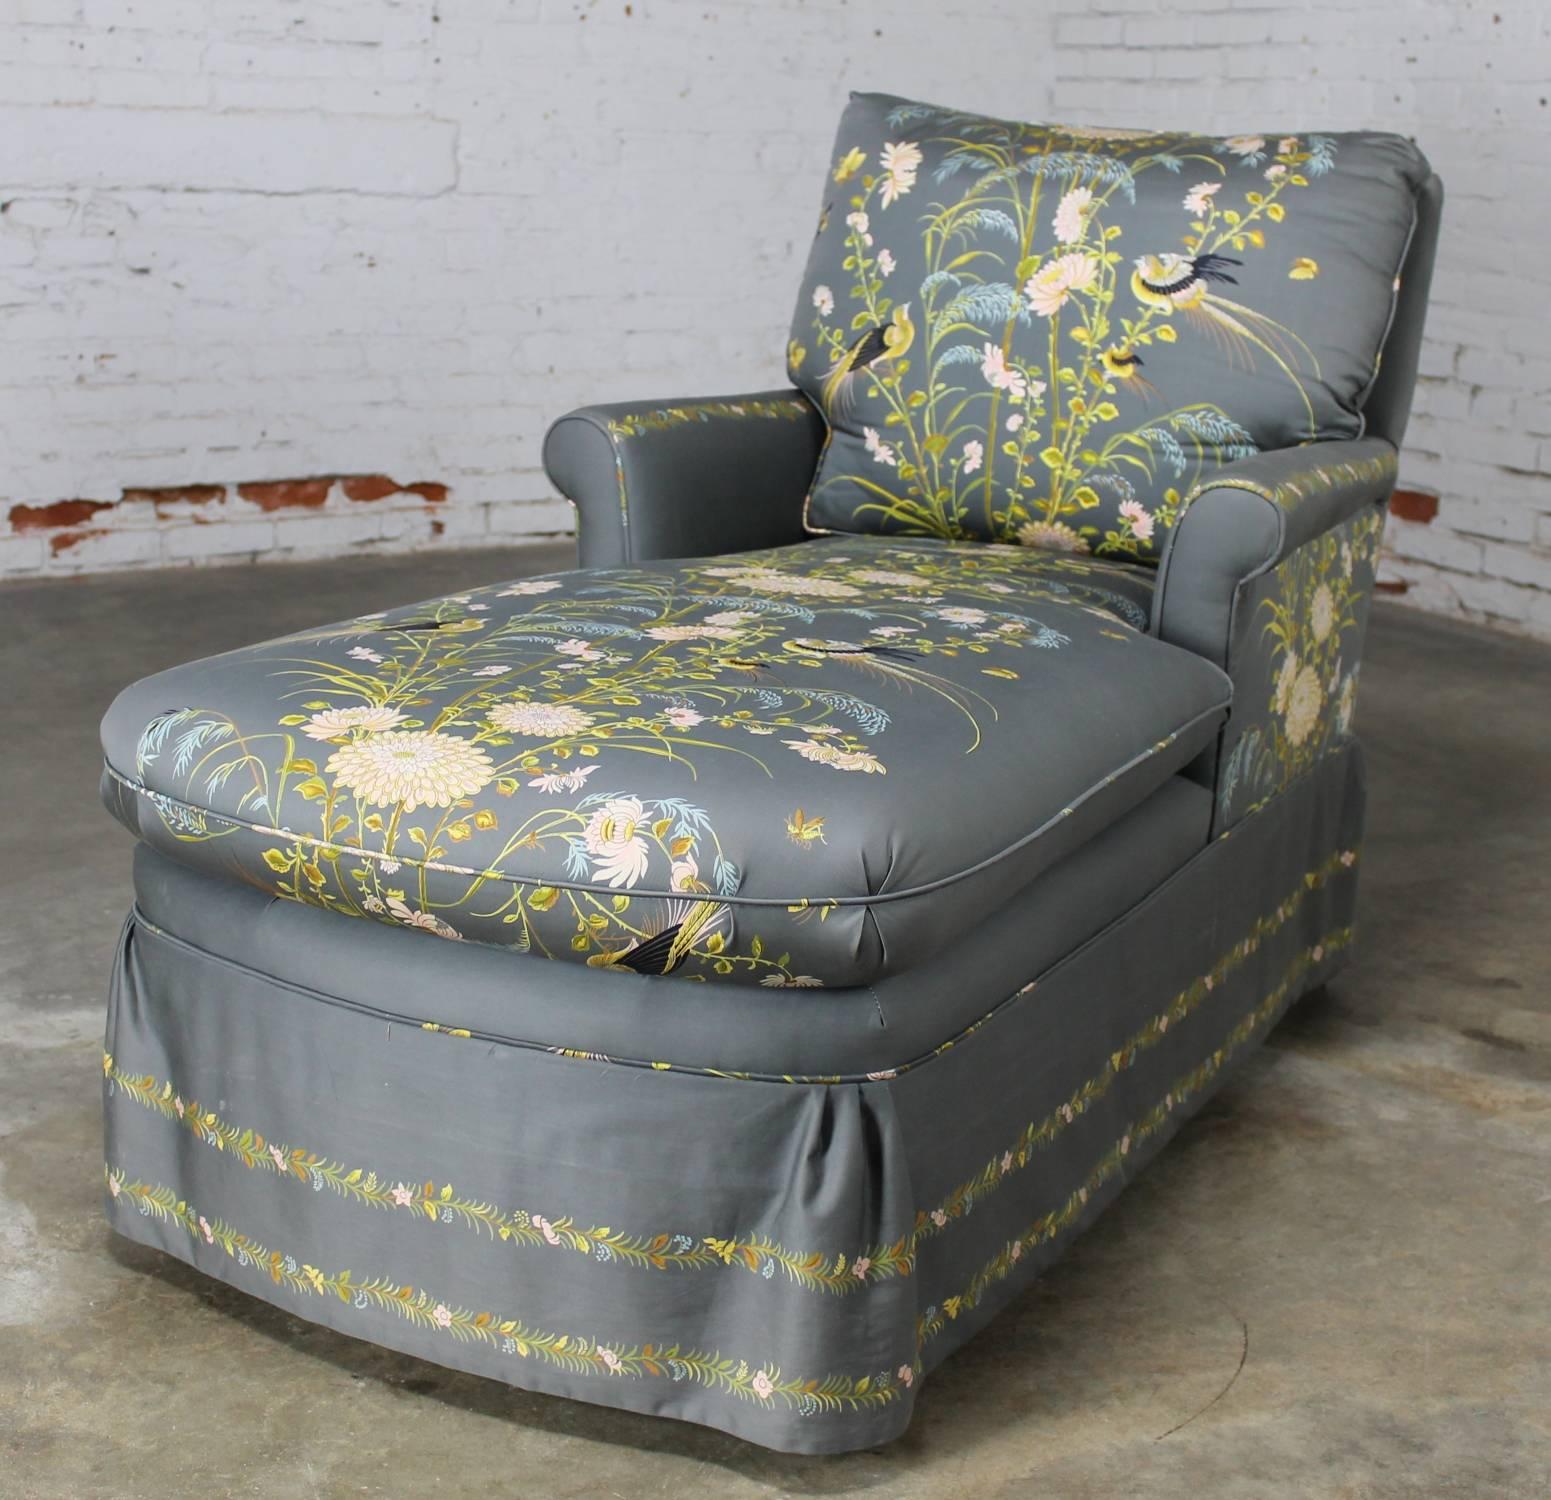 Charming vintage 1940s double armed chaise longue in a beautiful gray French chinoiserie chintz fabric. This chaise is in incredible condition having been recently reupholstered.

This wonderful chaise is so comfy and cozy and just the place to